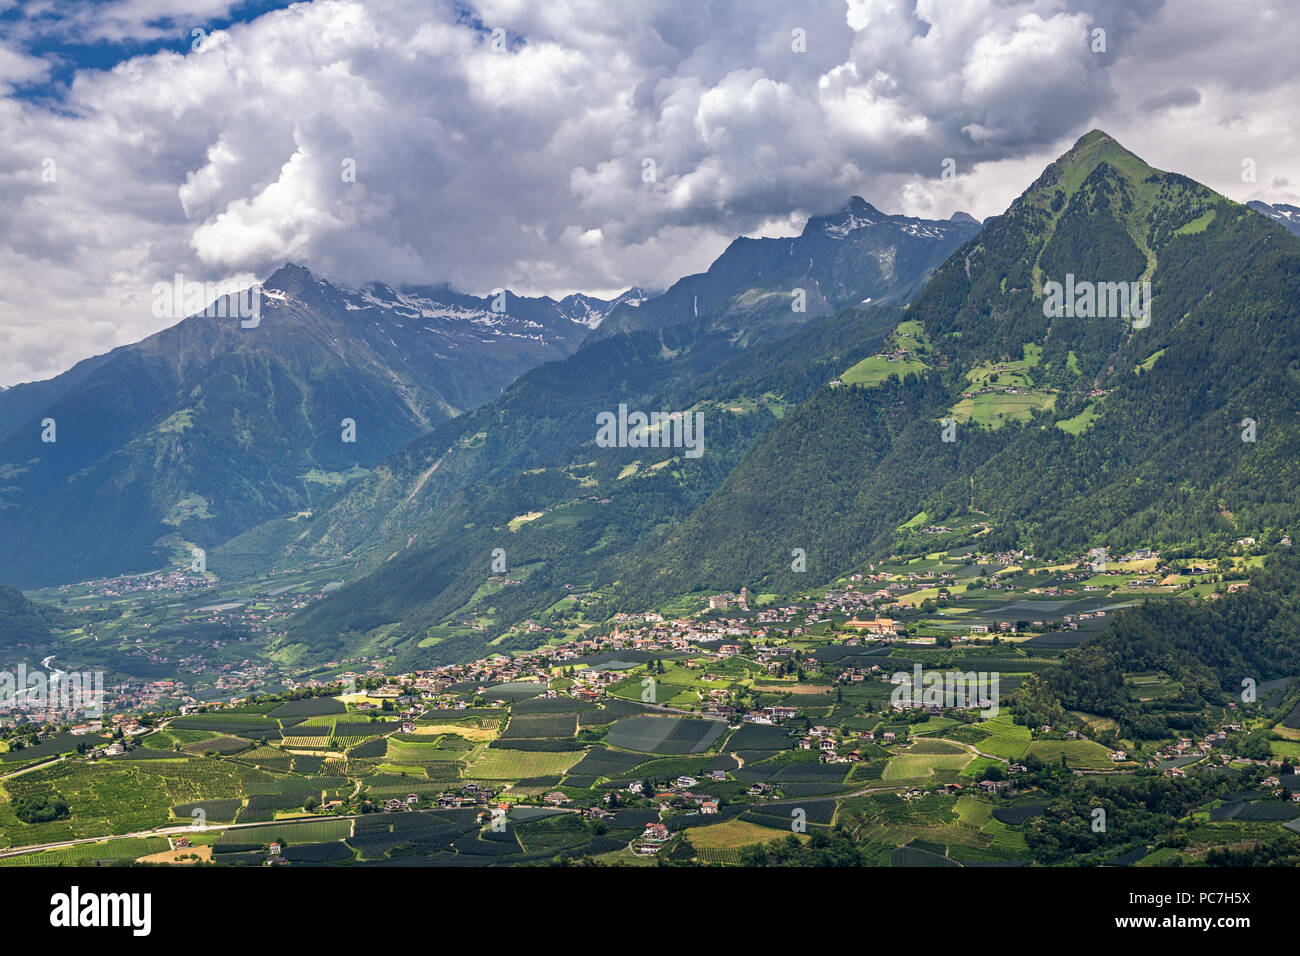 View from the Scena Waalweg path to Tyrol village and the Vinschgau above Schenna near Meran, South Tyrol Stock Photo